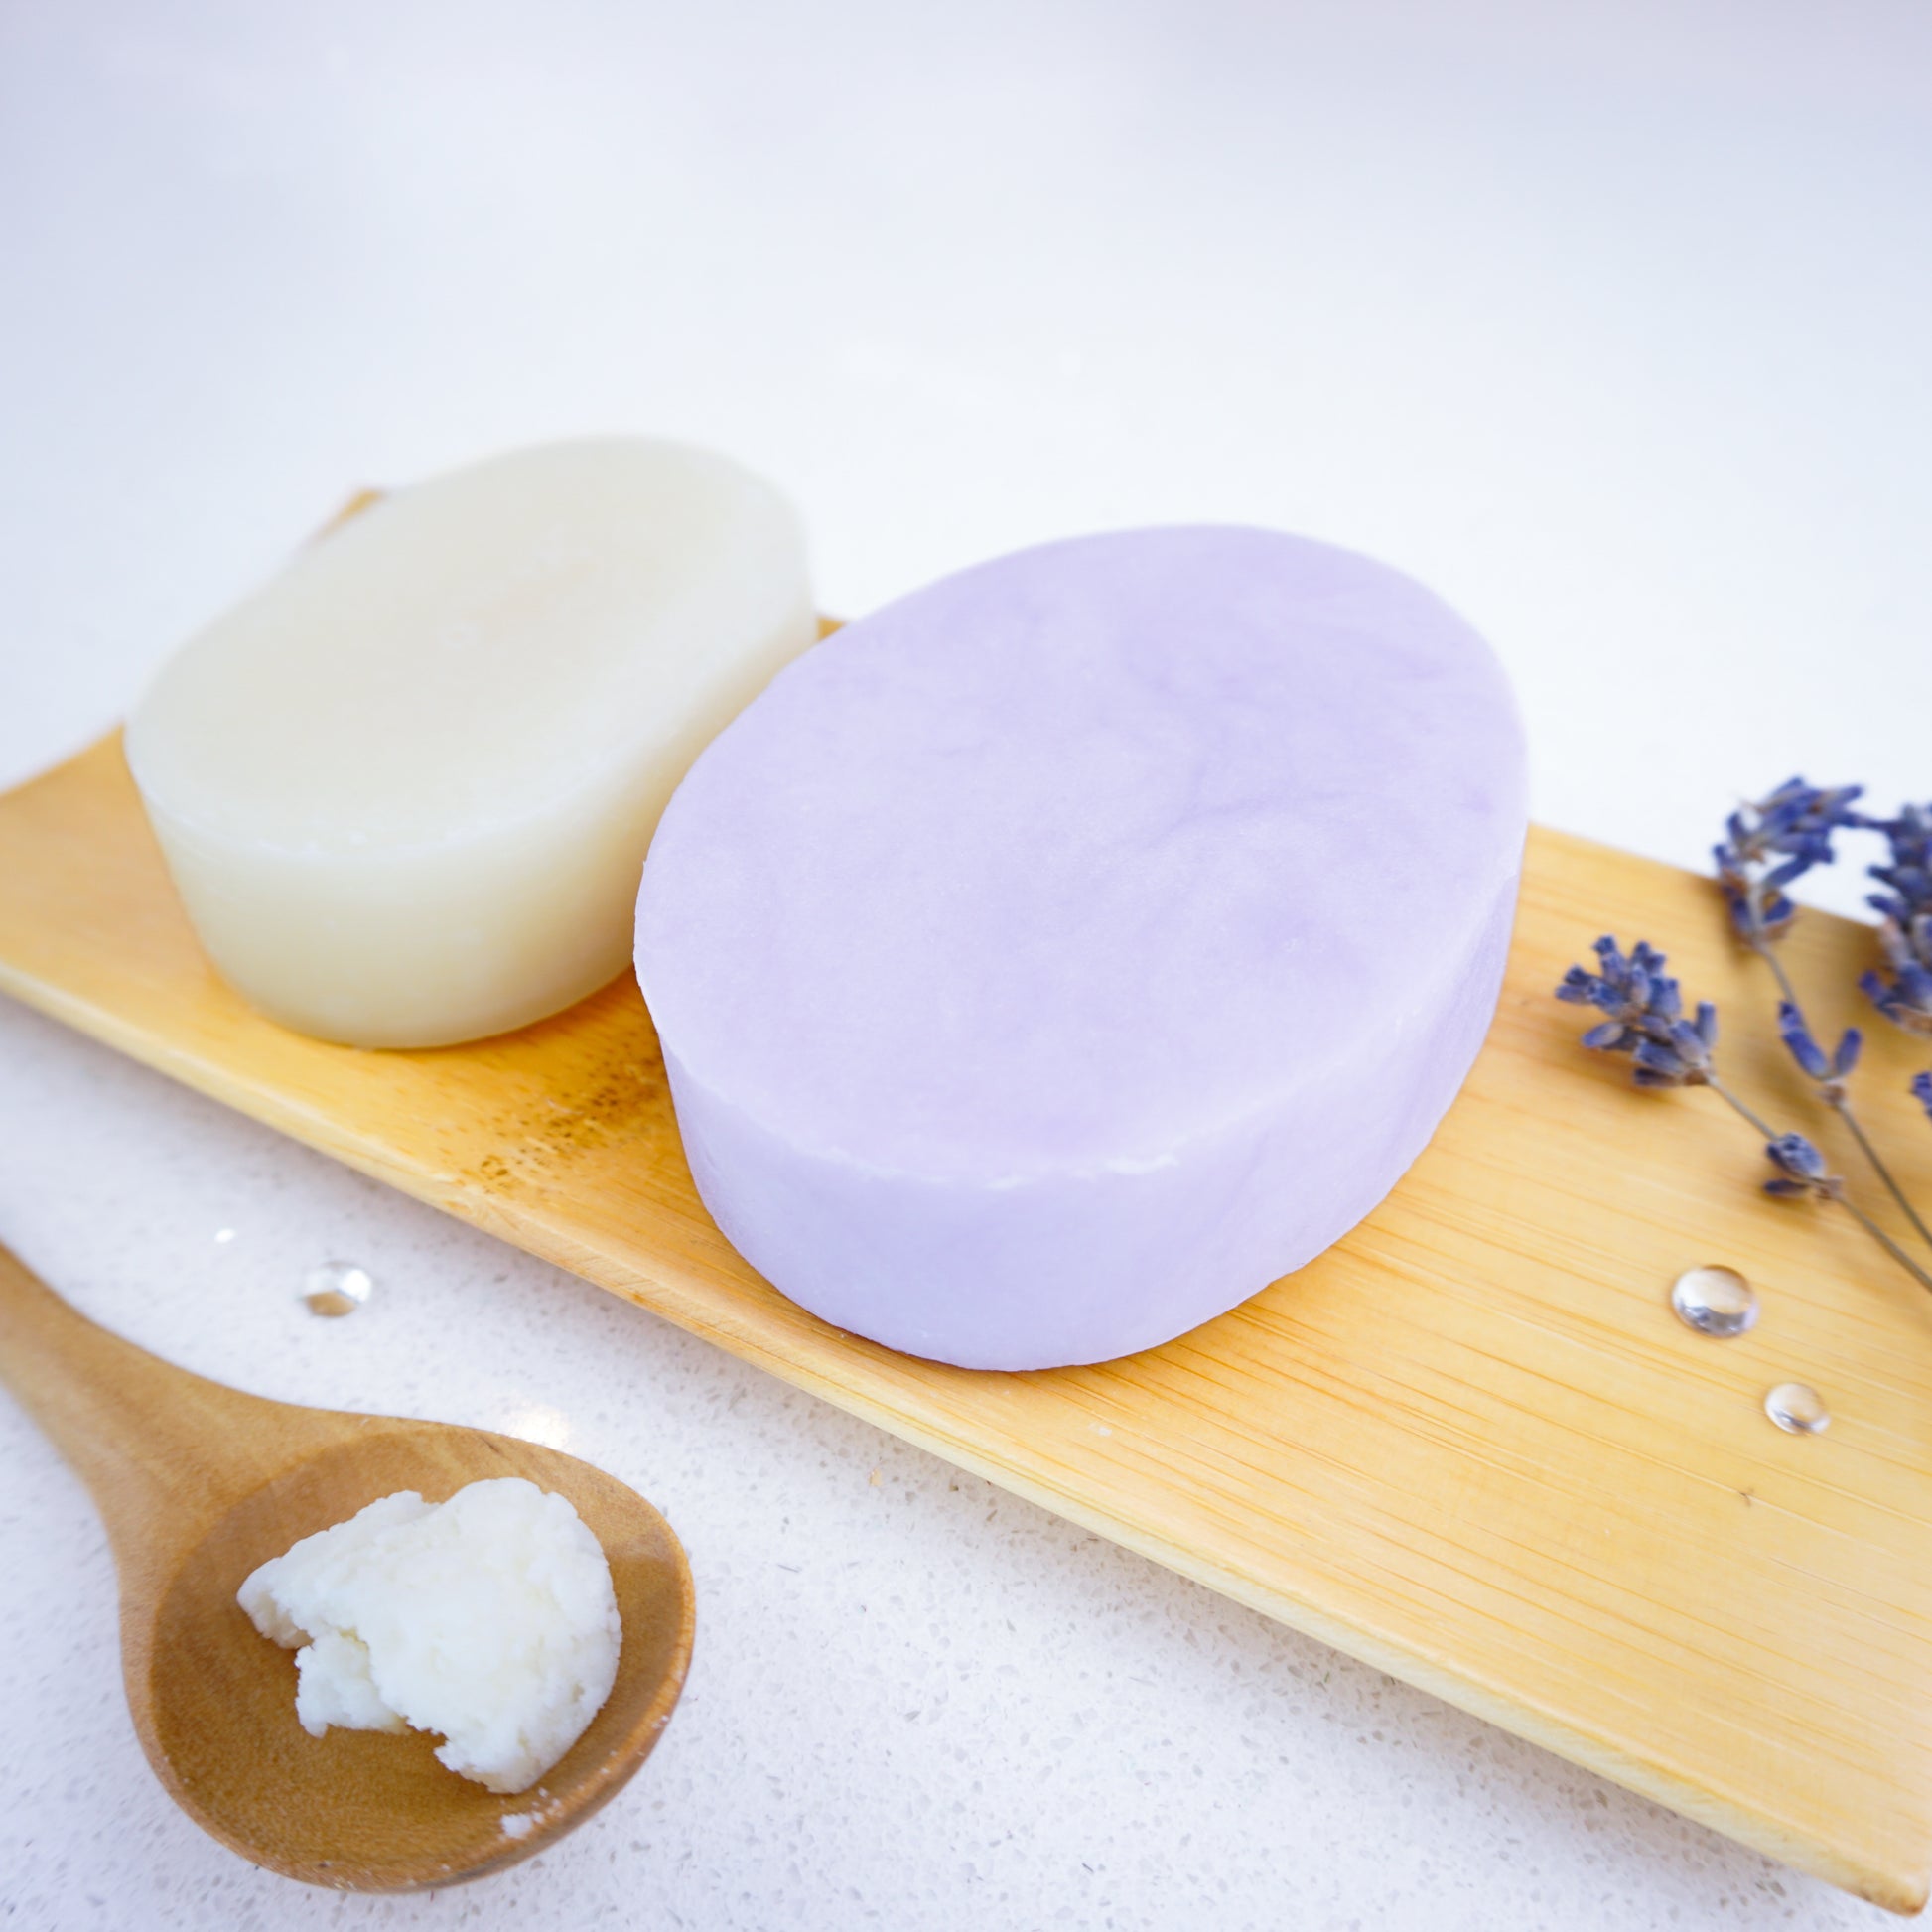 Lavender hydrating shampoo and conditioner bars with added shea butter